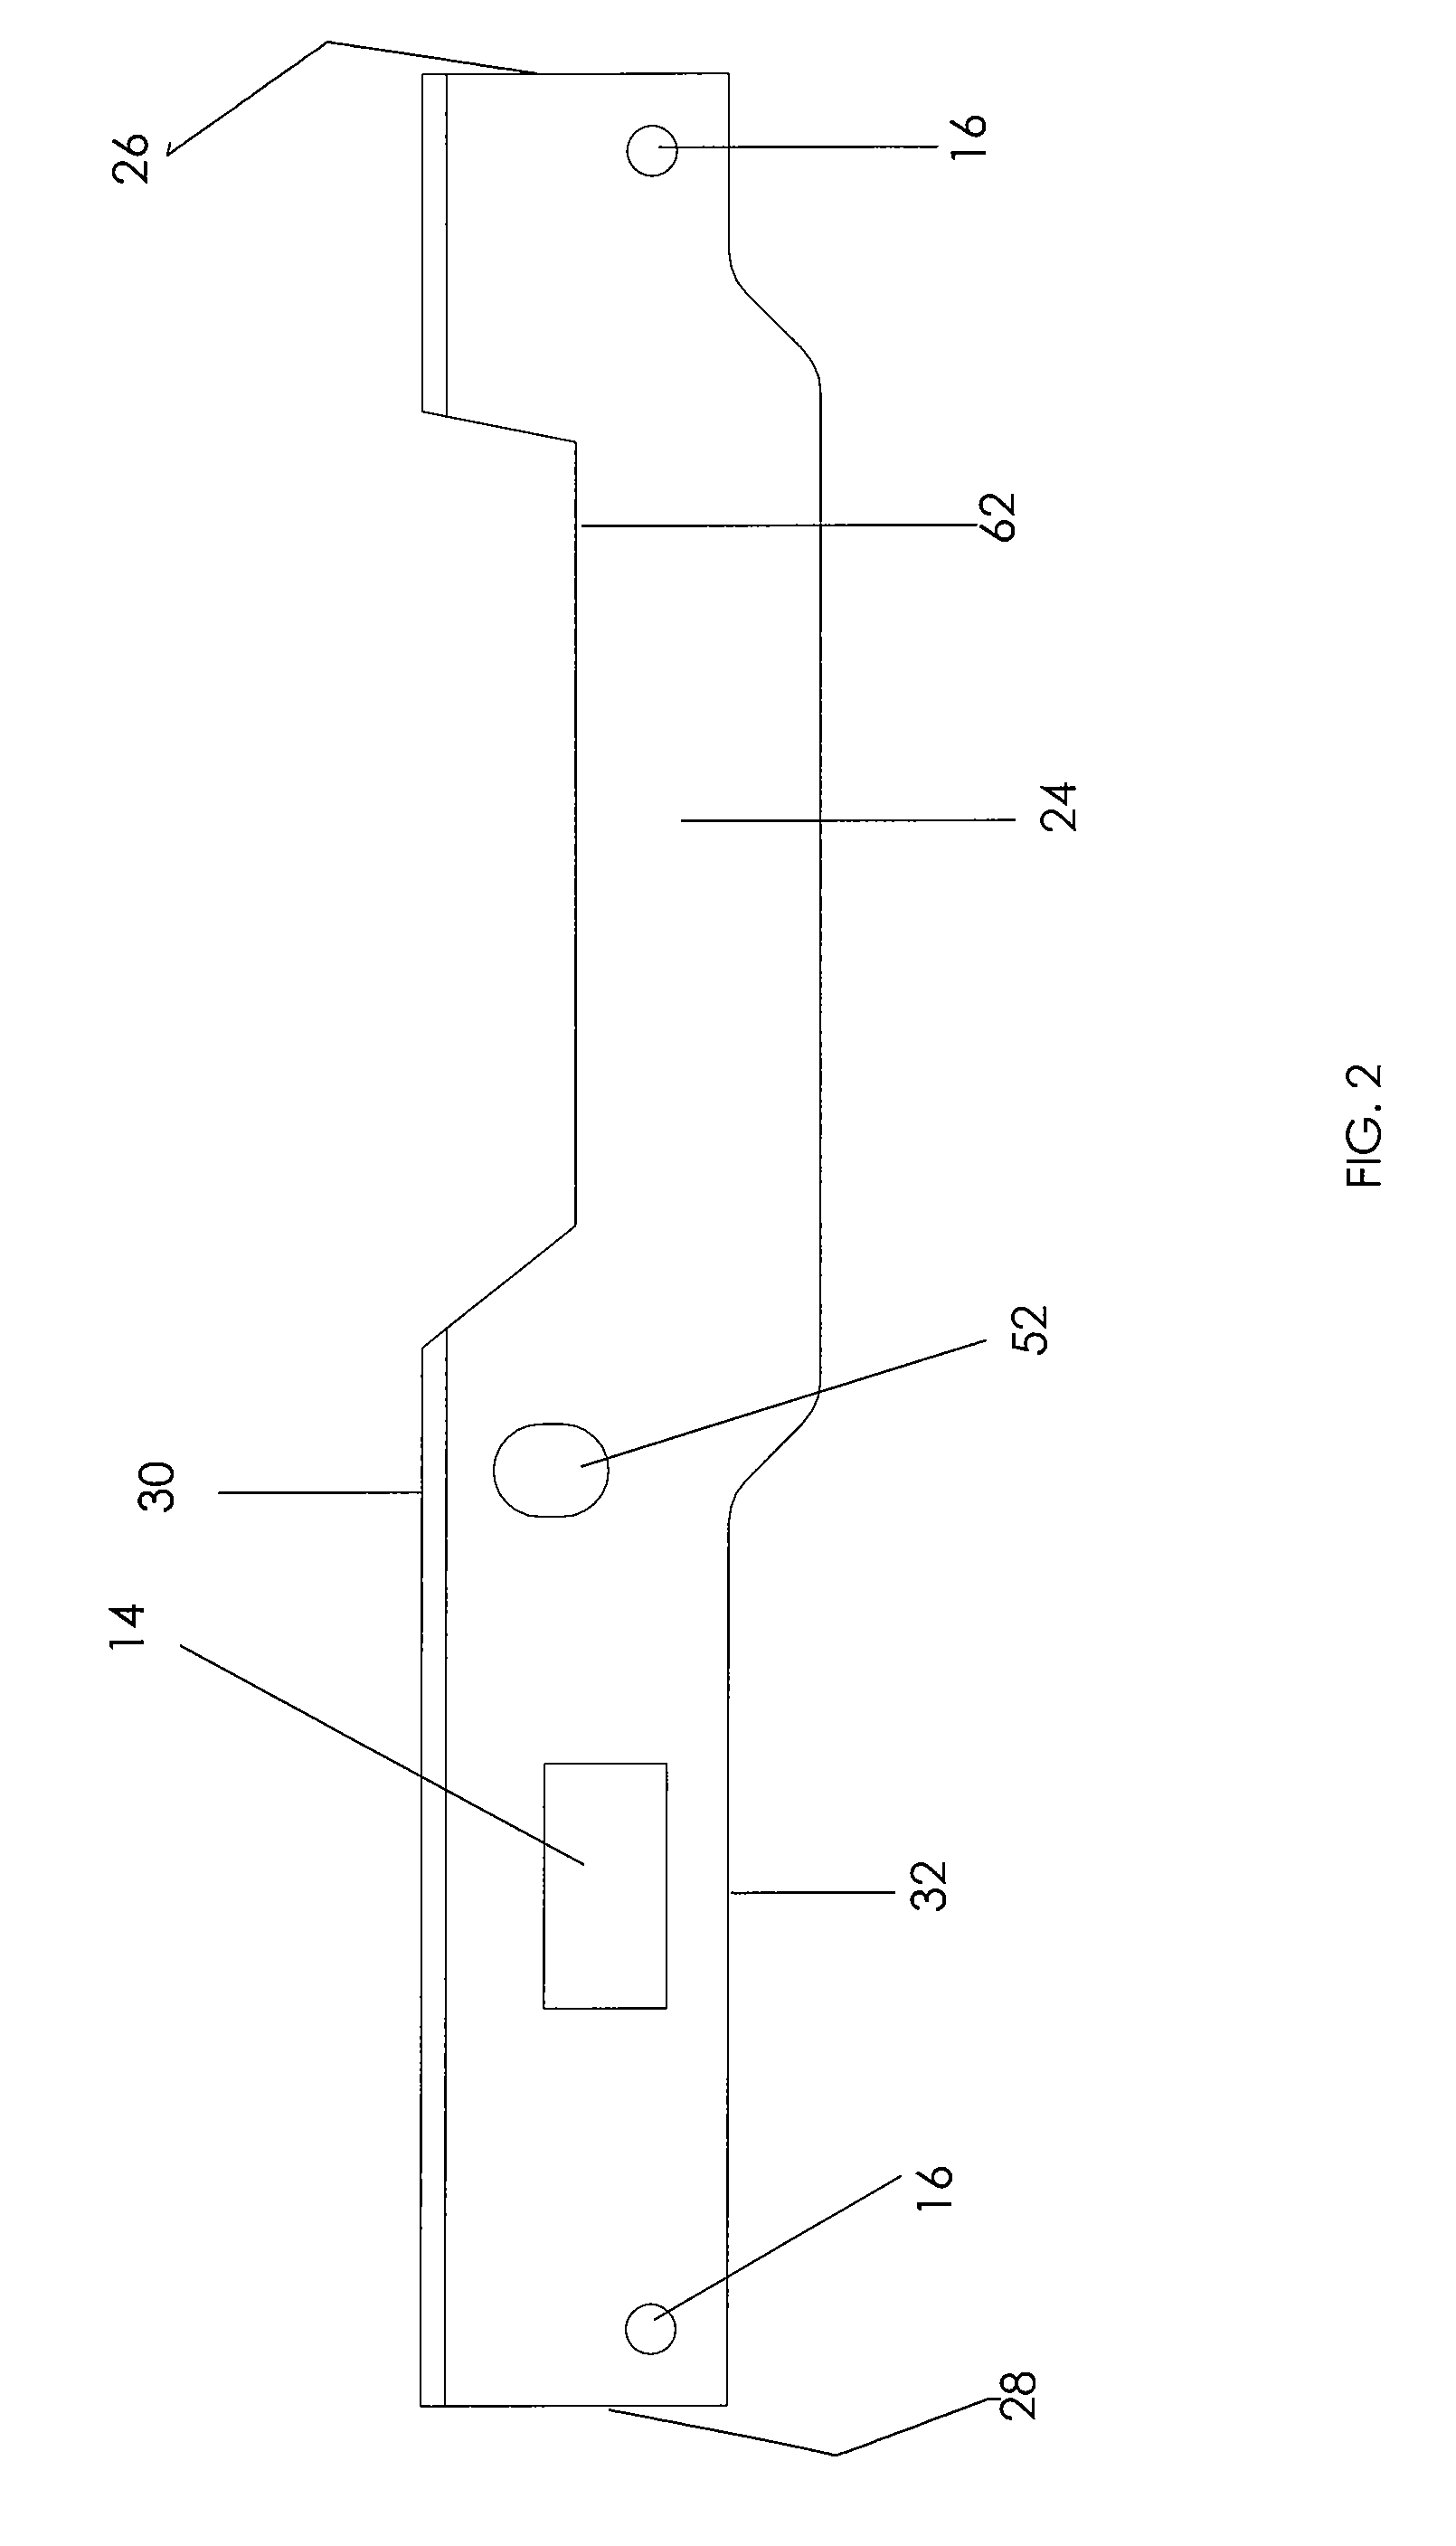 Rail section and switch mechanism for a conveyor assembly and method of making and assembling same